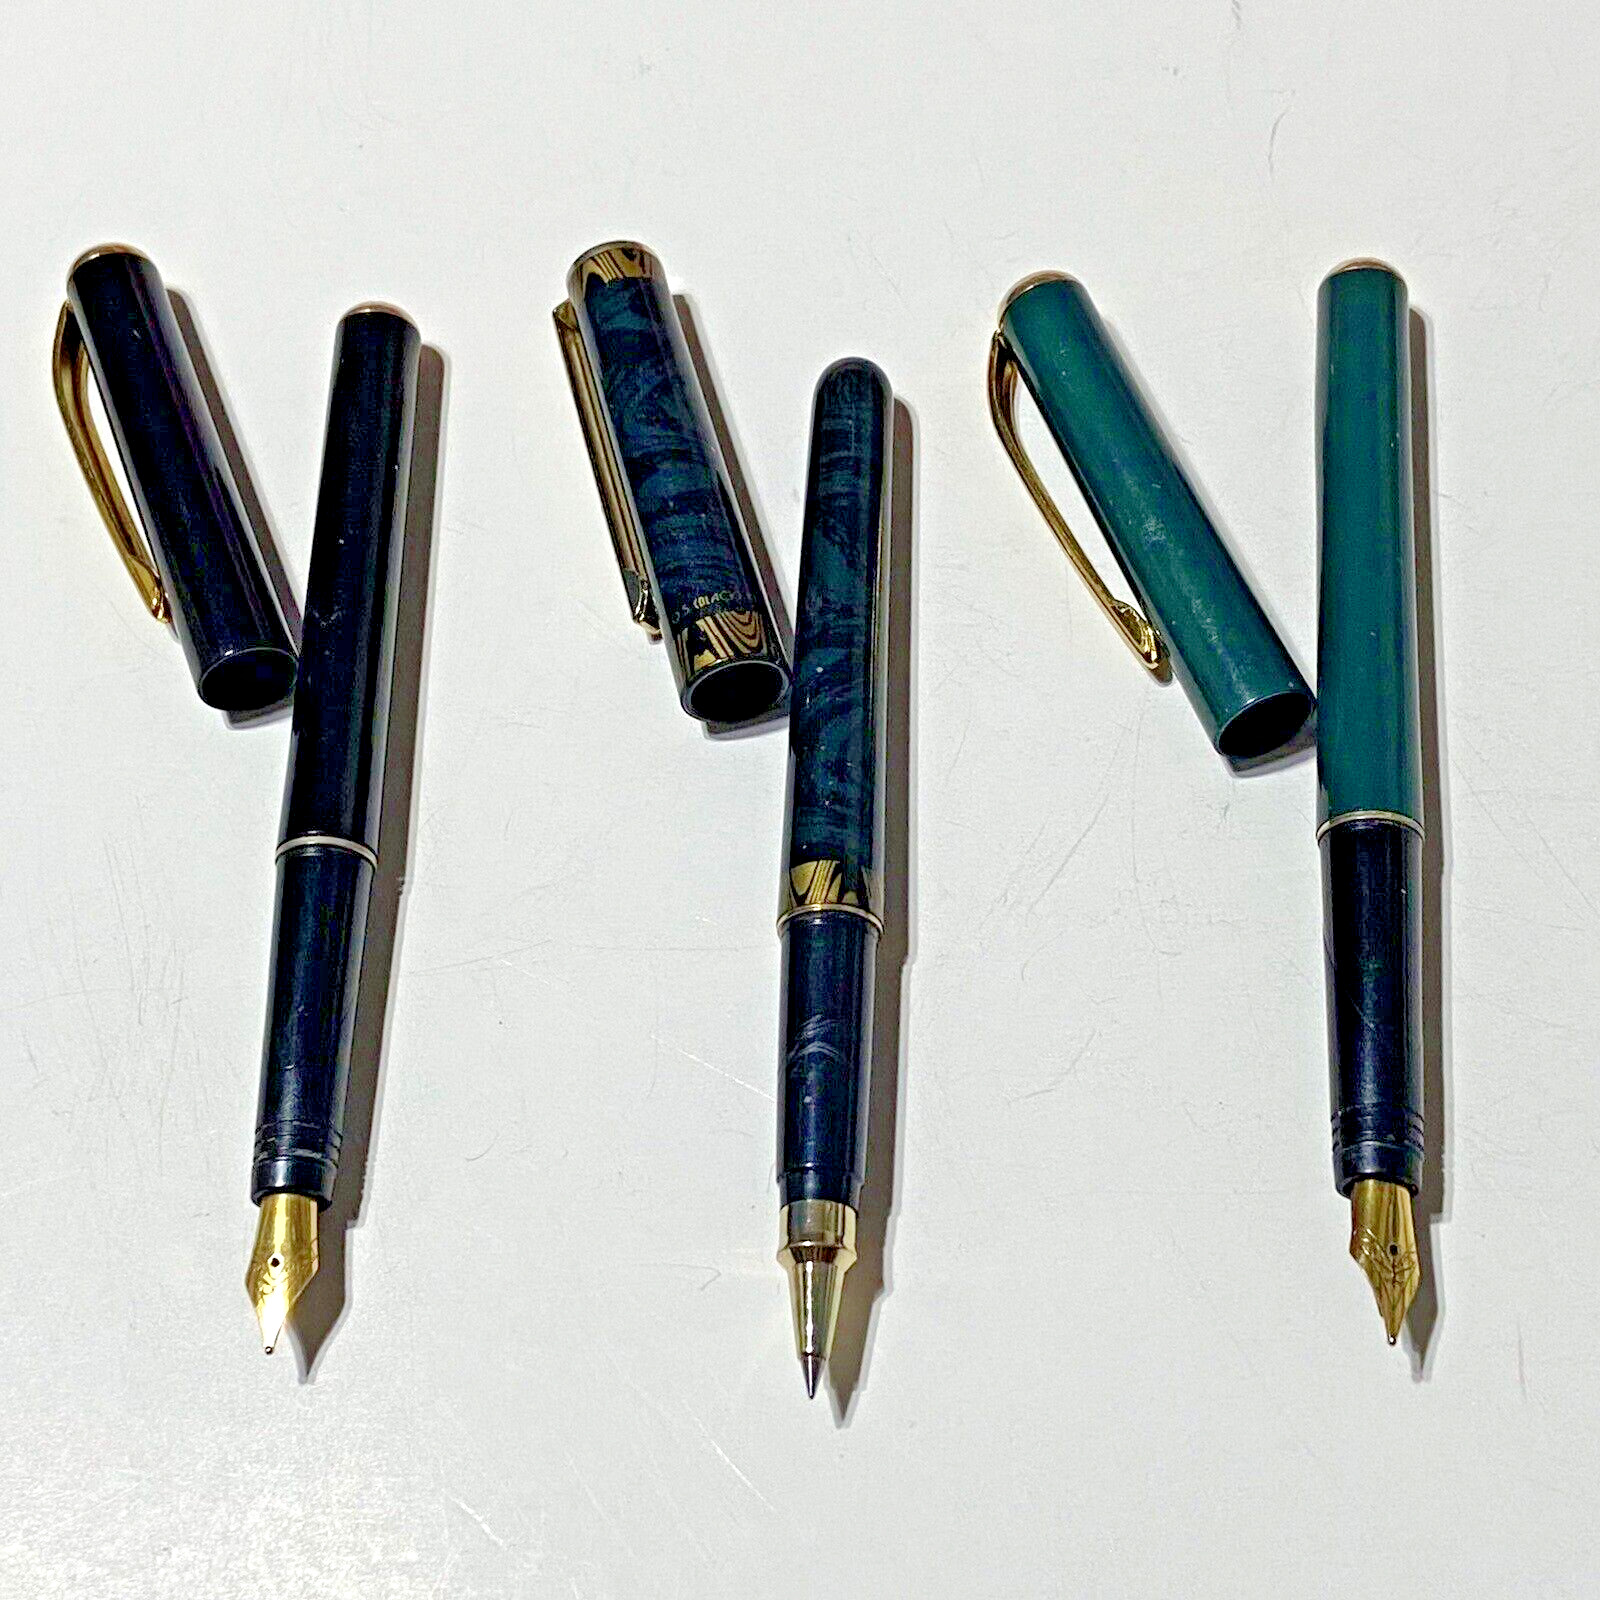 3 VTG Pens: 1 MICRO CERAMIC Ballpoint and 2 Unbranded Fountain Pens /Refillable